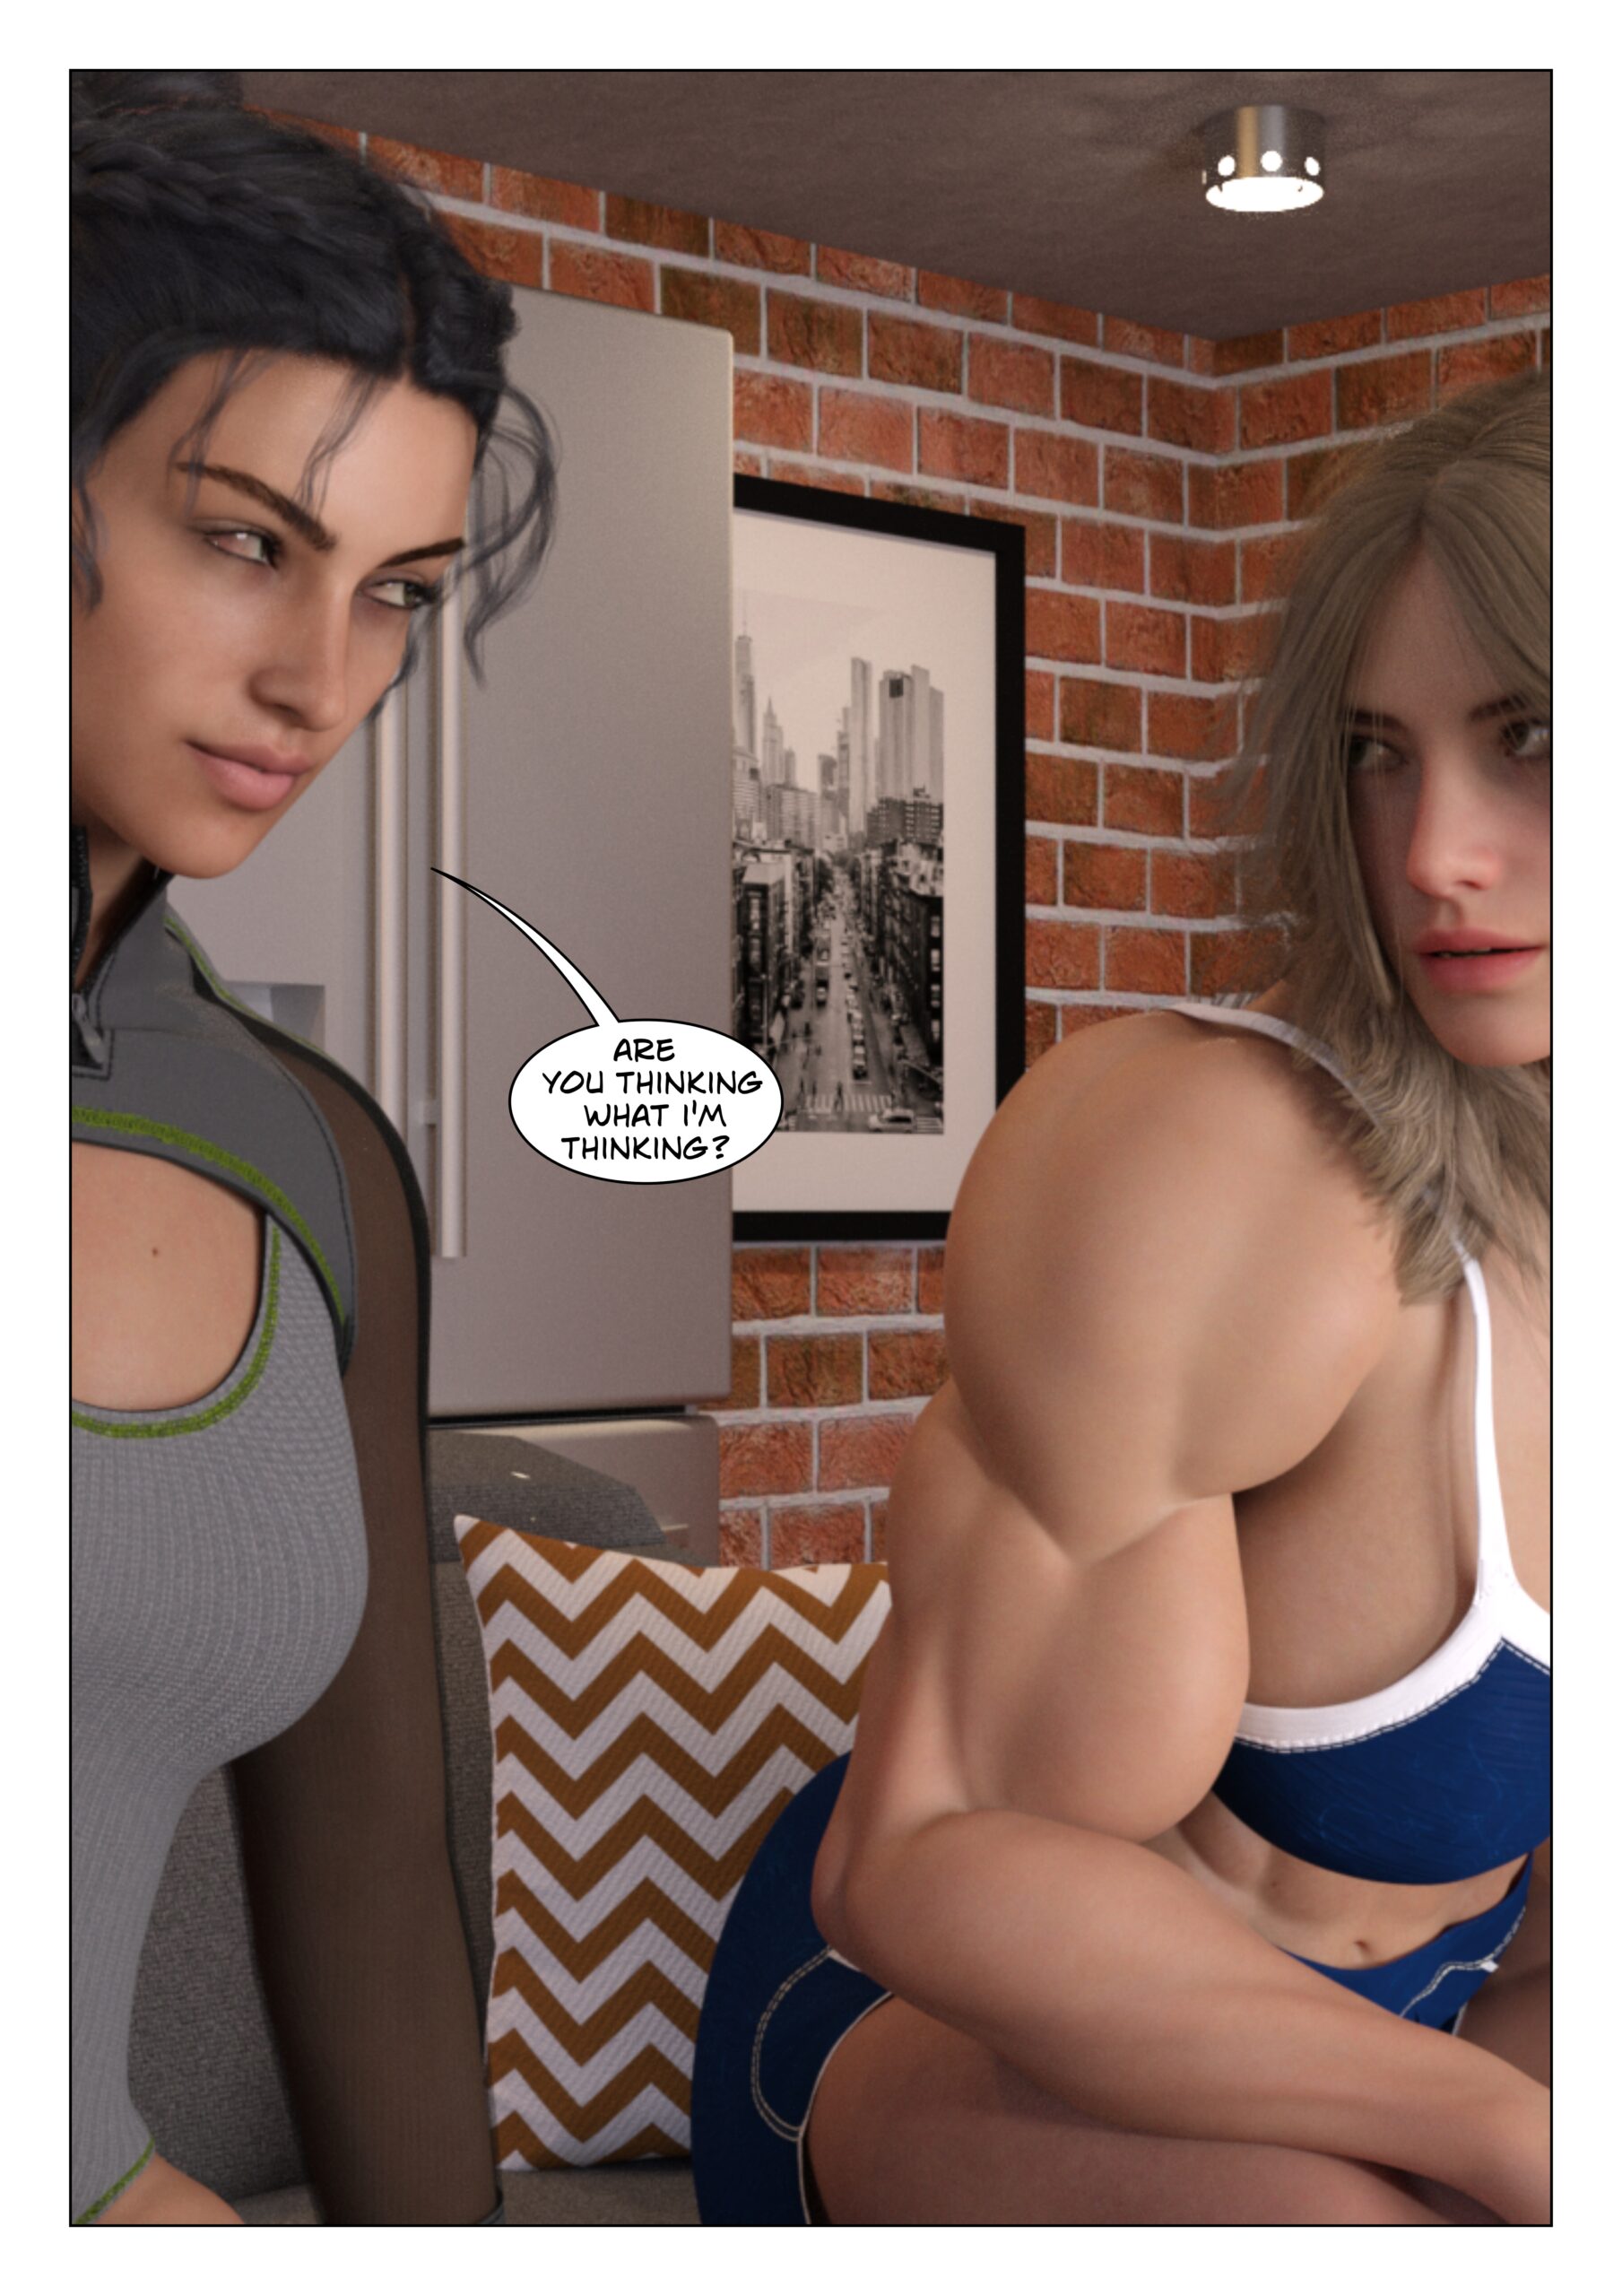 female muscle growth comic